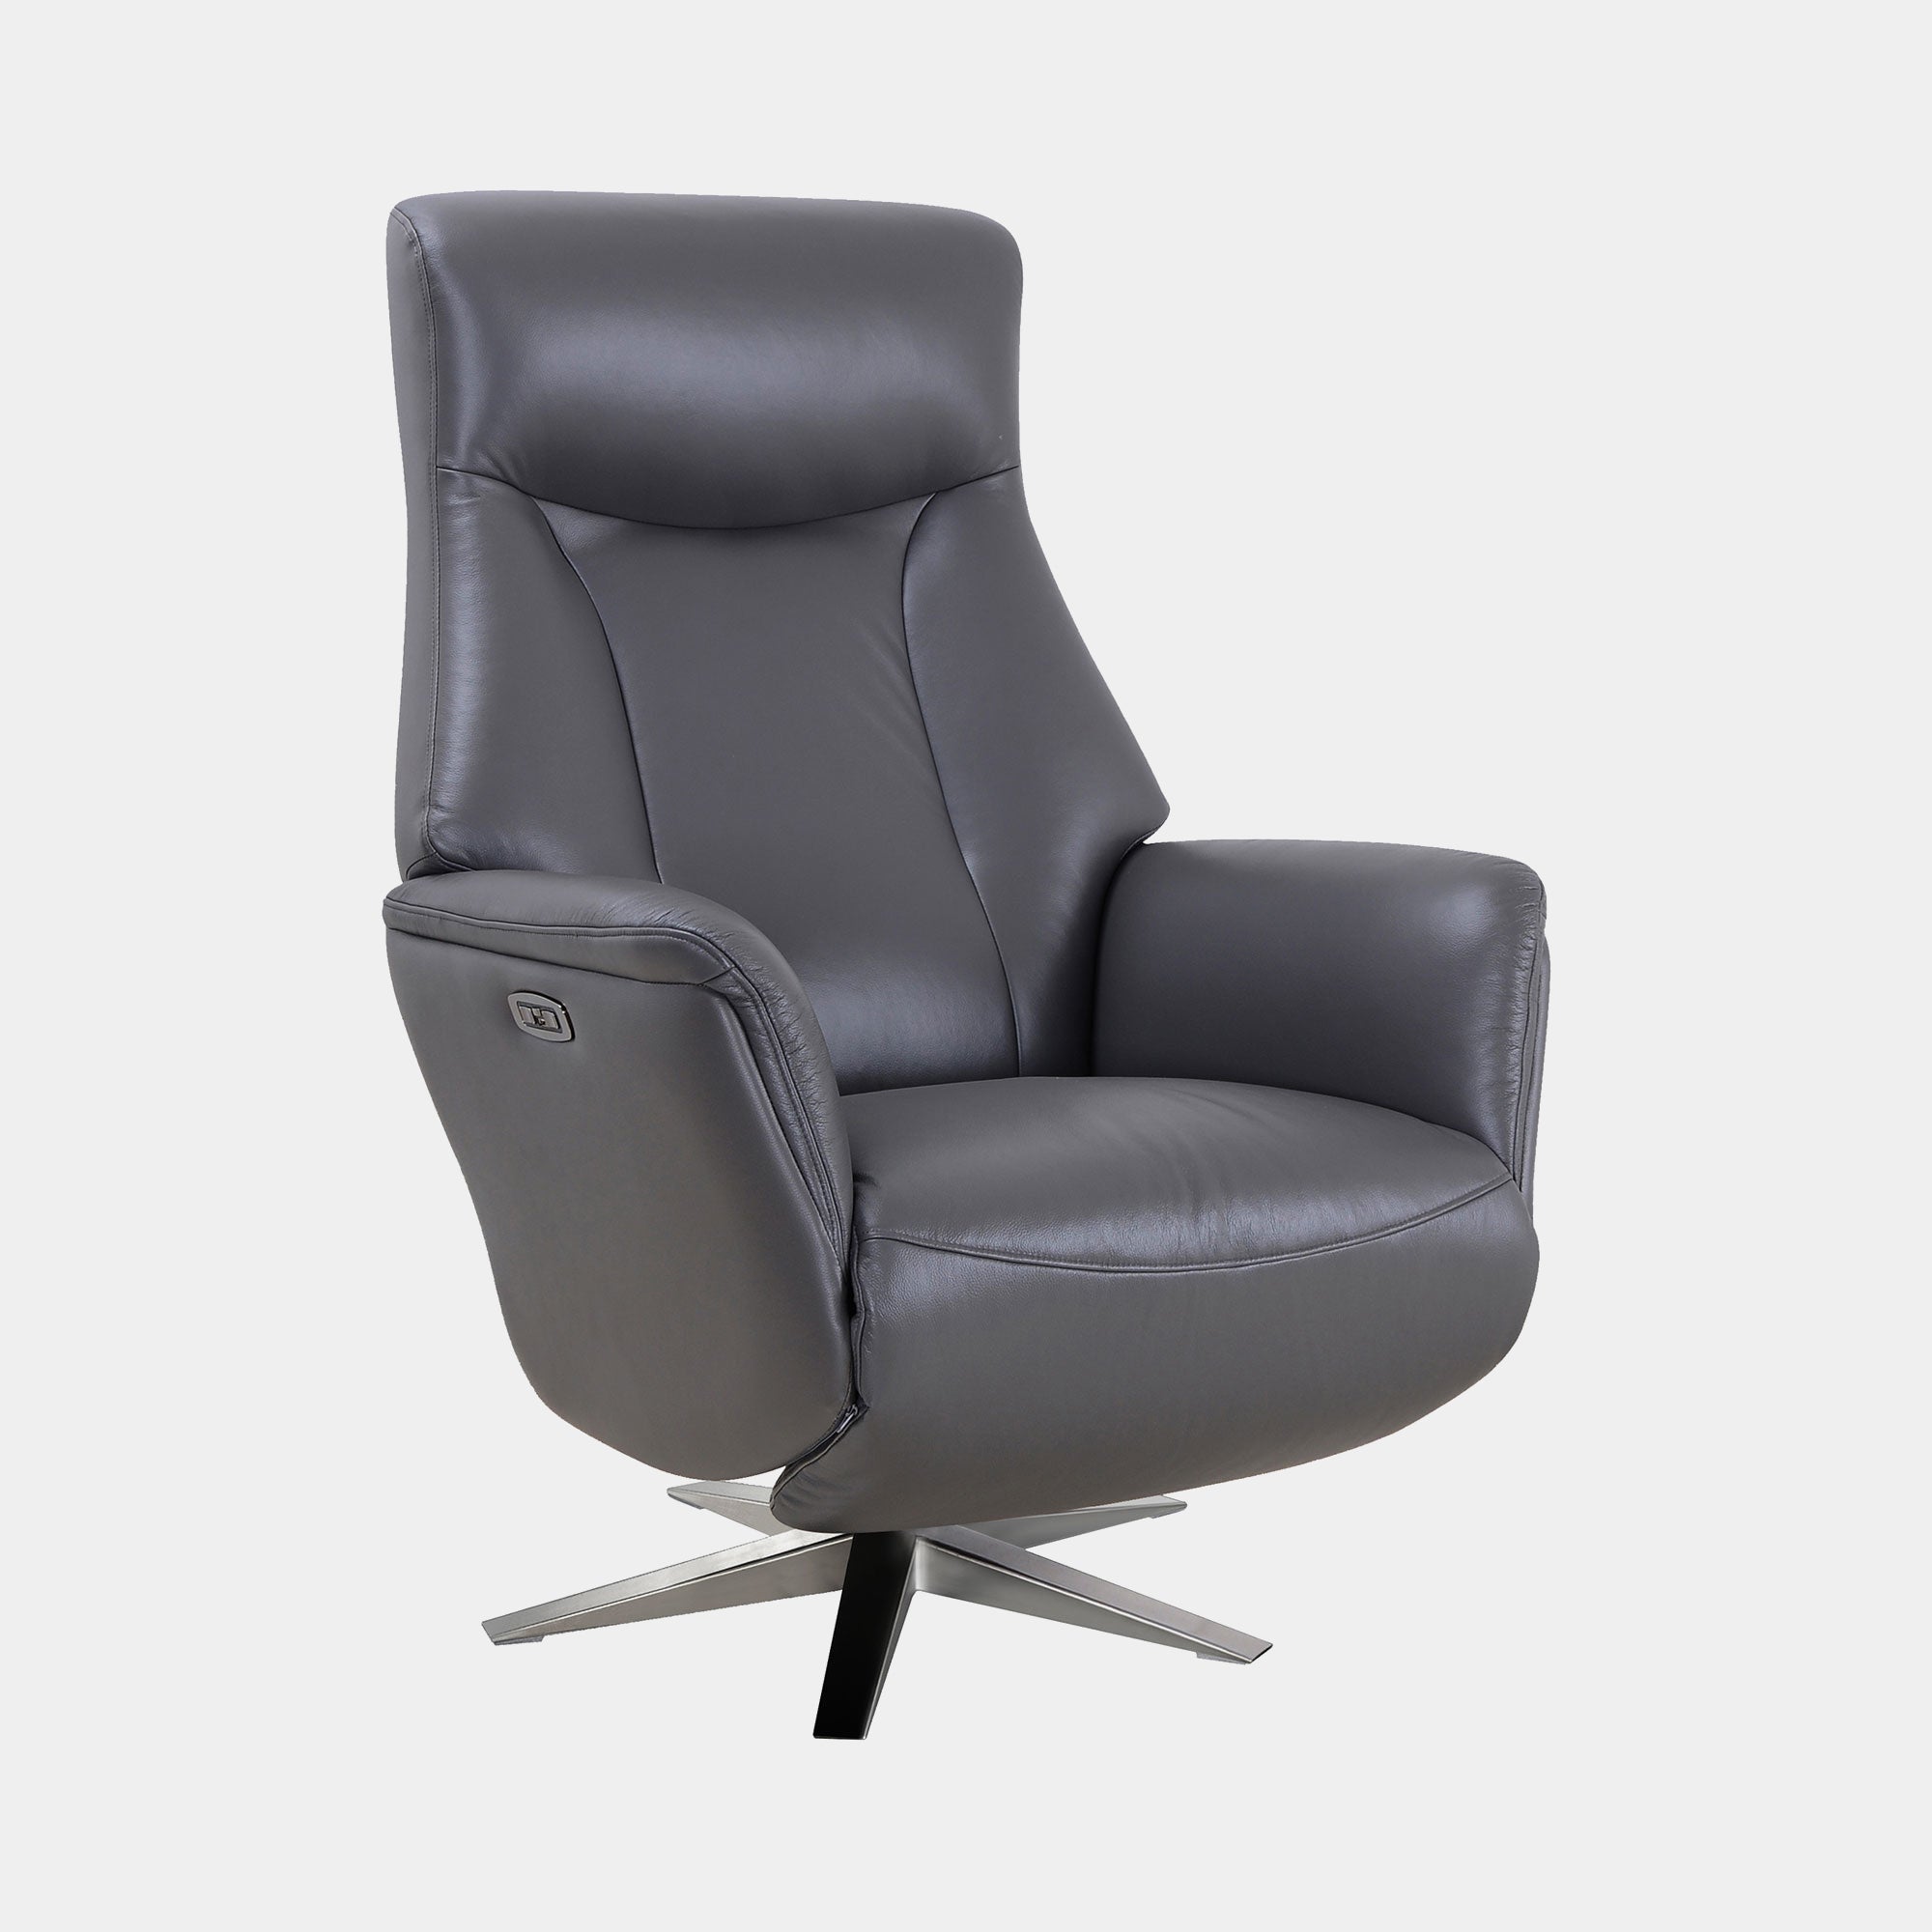 Power Swivel Recliner Chair In Leather Match Iron with Satin Nickel Base